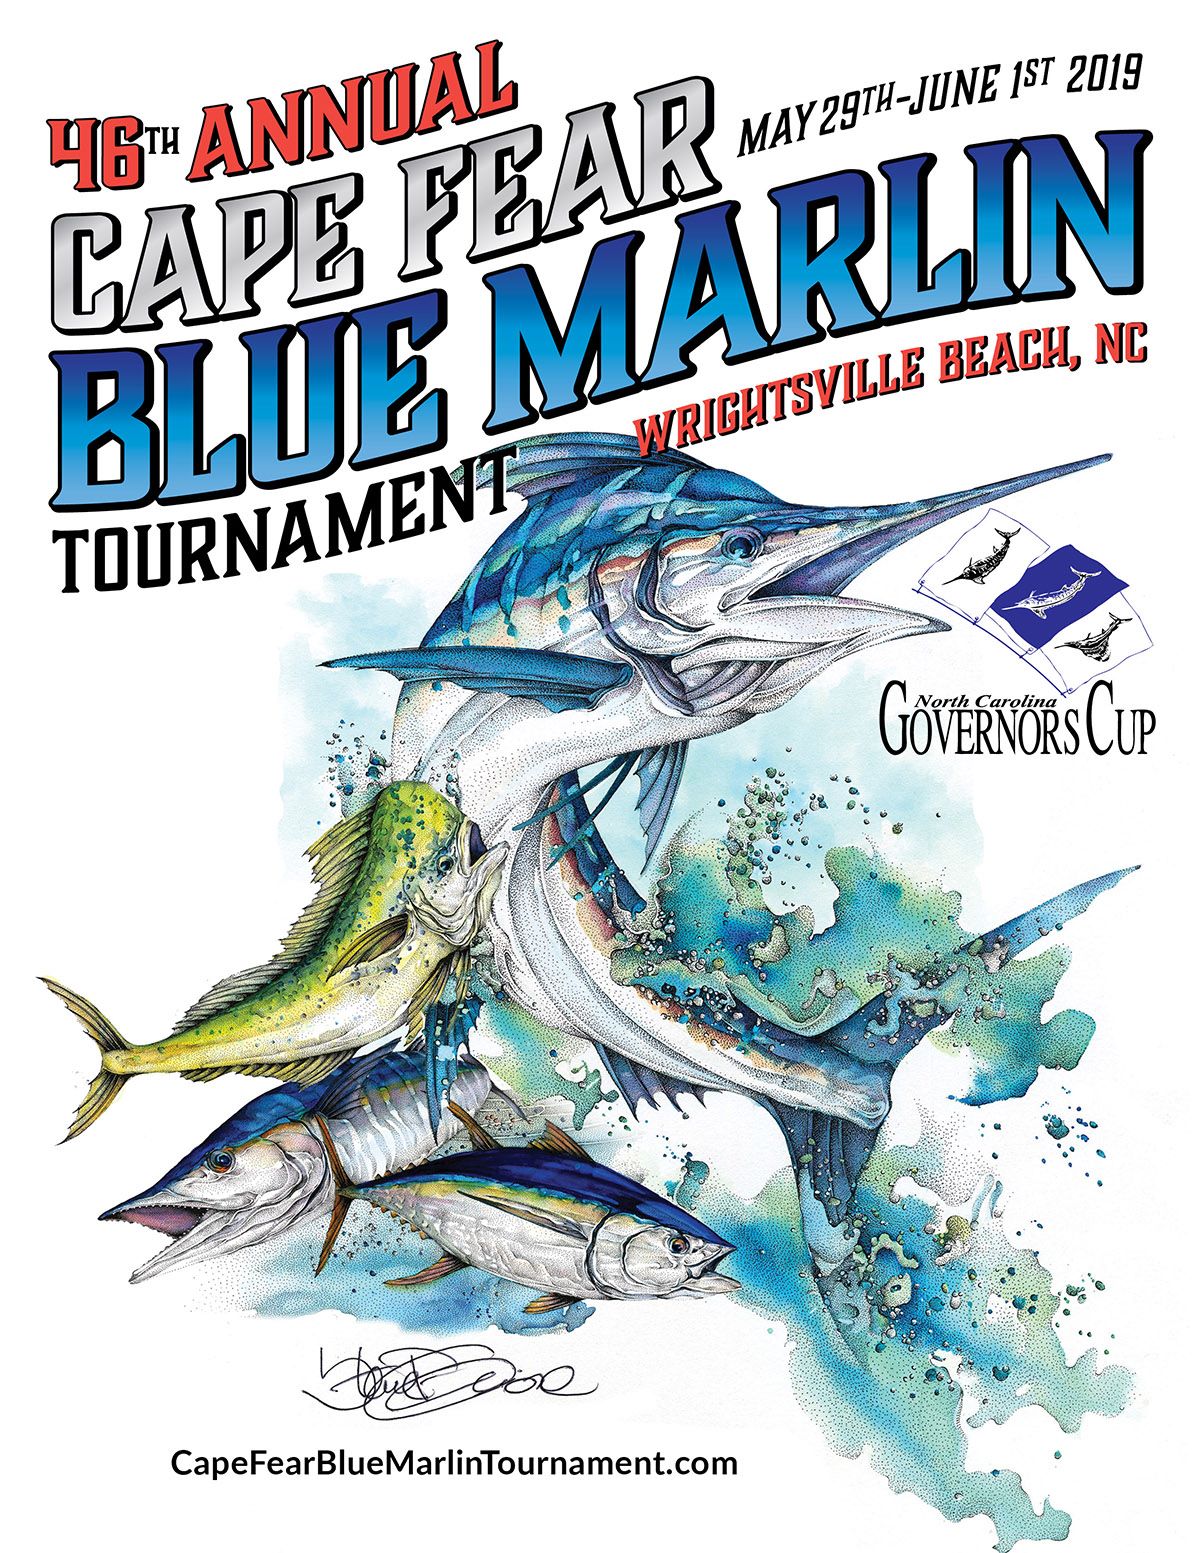 Riggs Yacht Sales Hosts Cape Fear Blue Marlin Tournament and Rob